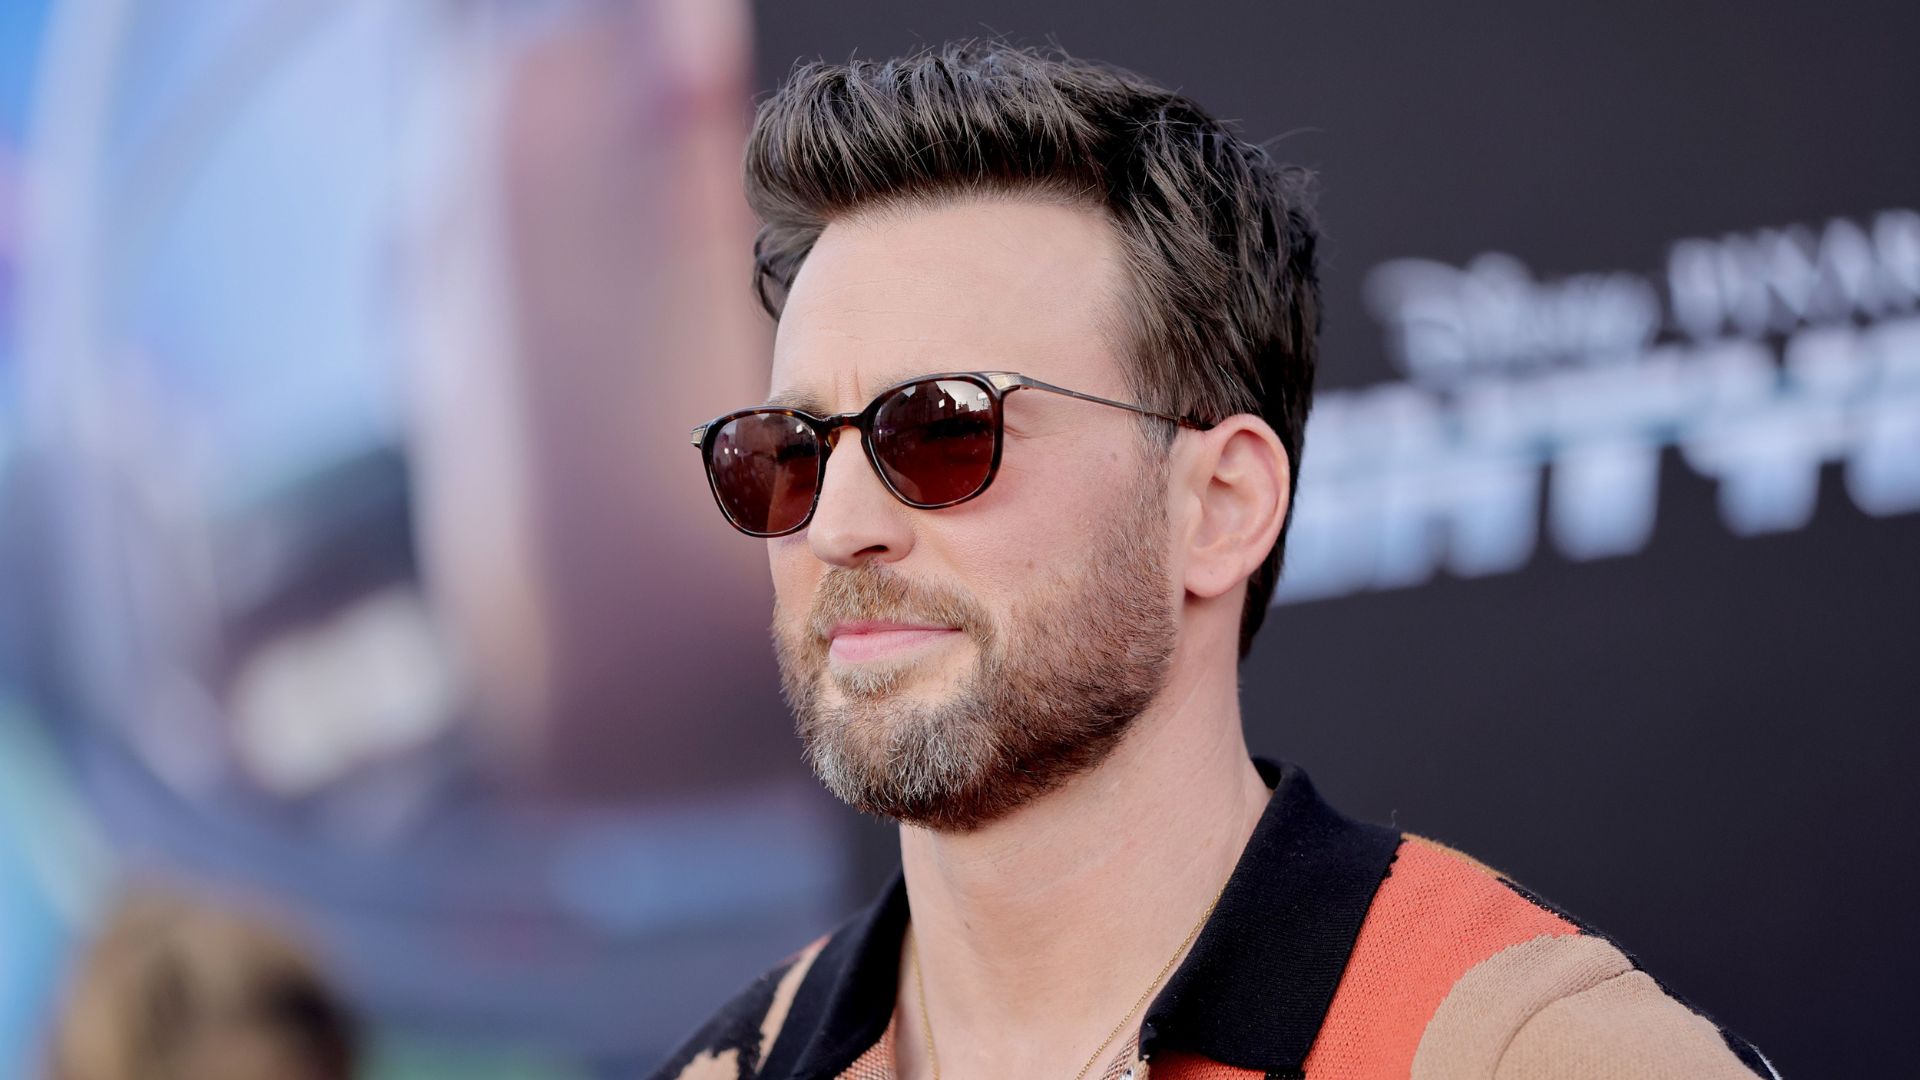 Chris Evans: Quiff Hairstyle With Short Back And Sides And Neat Beard | Man  For Himself